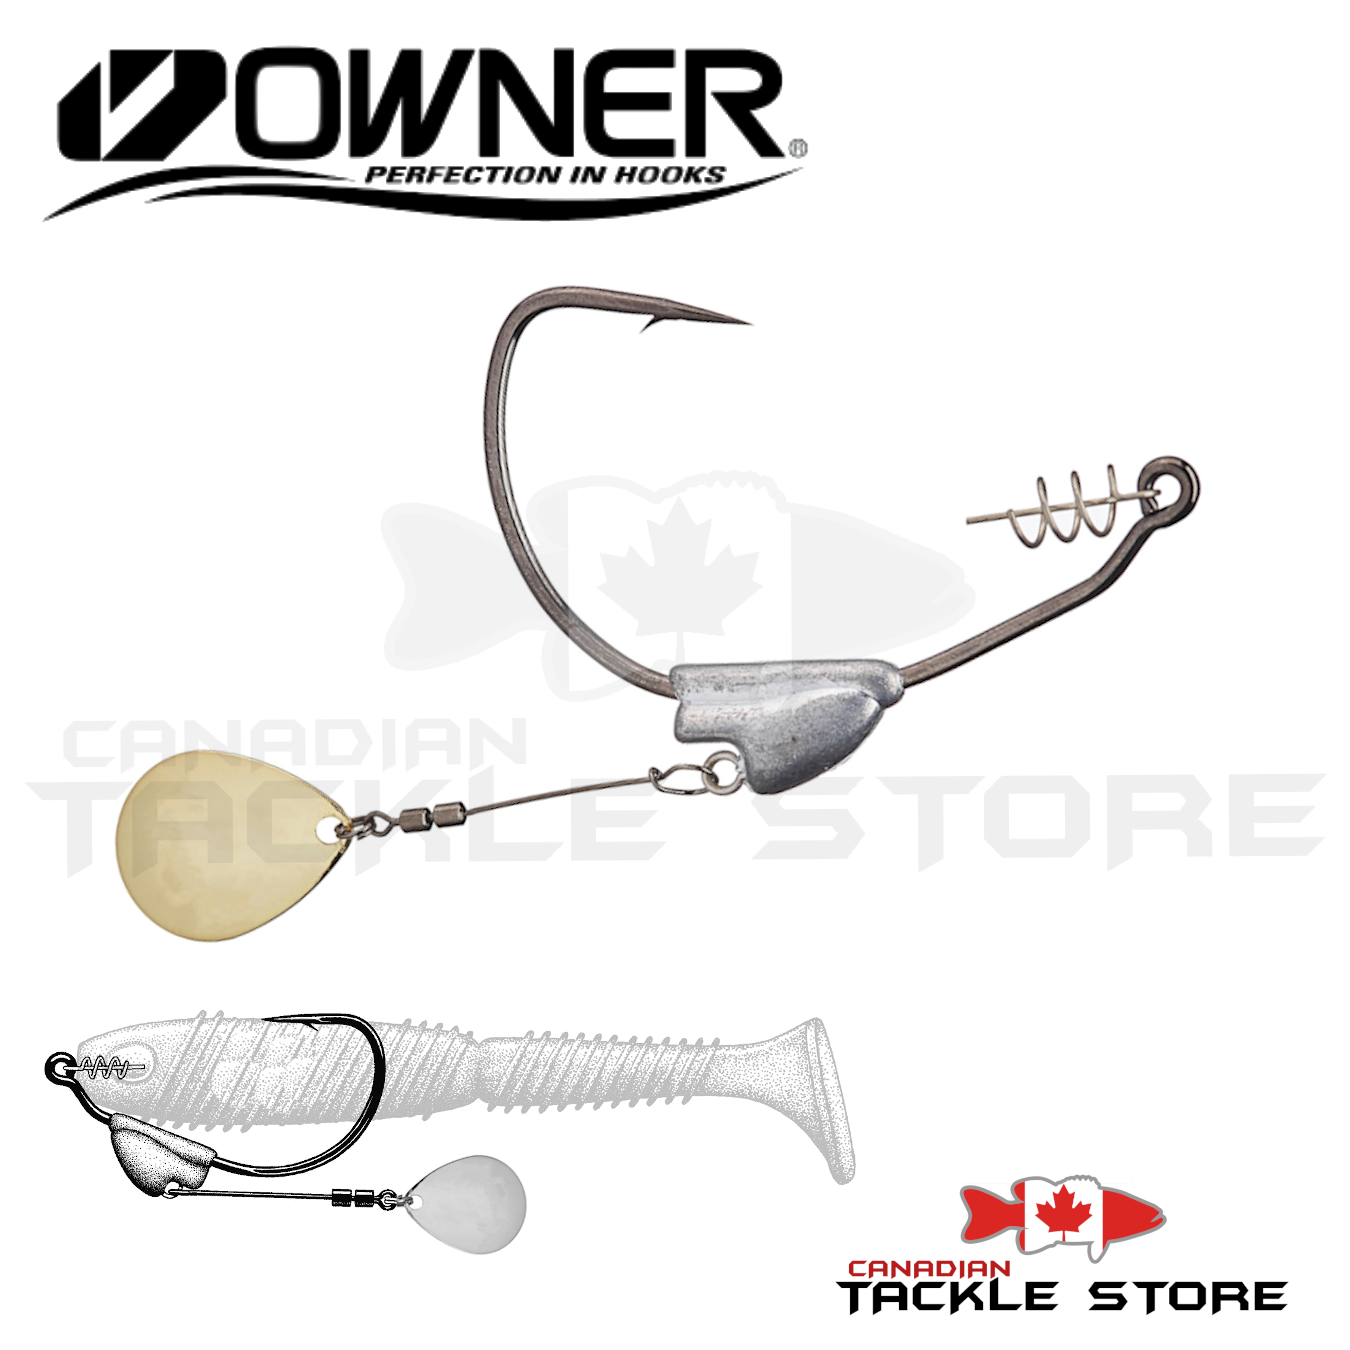 Terminal Tackle – Canadian Tackle Store